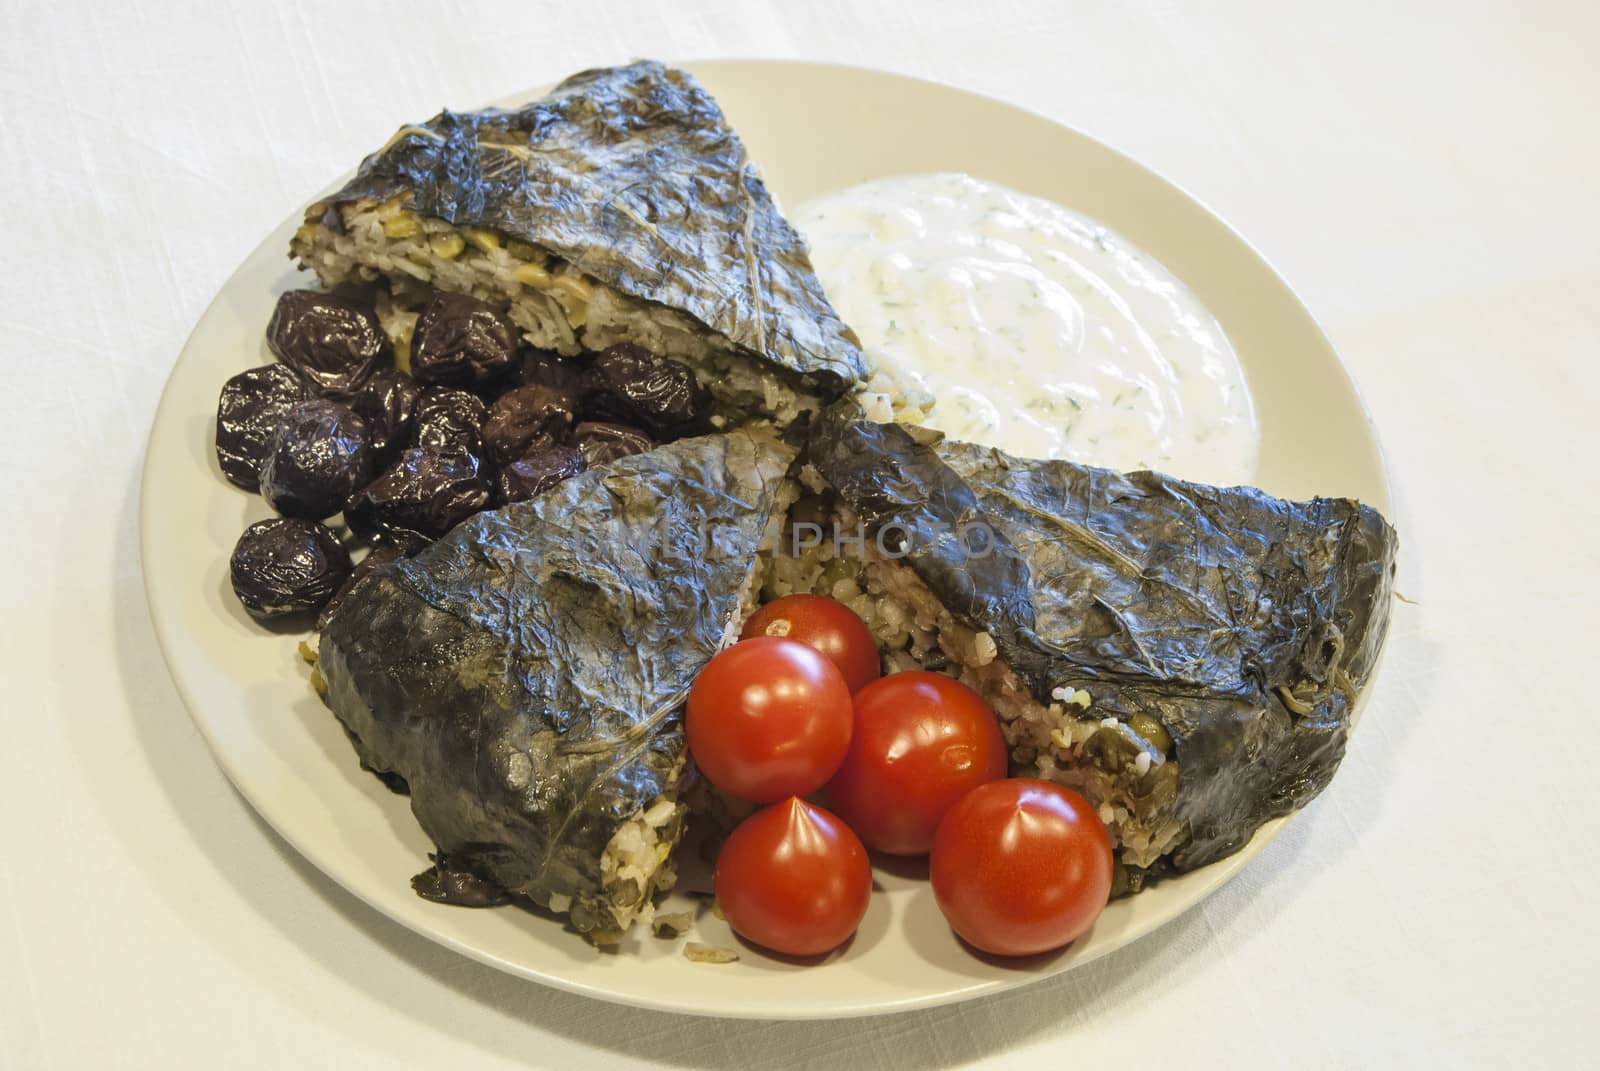 Homemade pie with rice, olives, vegetables, covered with vine leaves, garnished with cherry tomatoes and yogurt with chopped cucumber and garlic